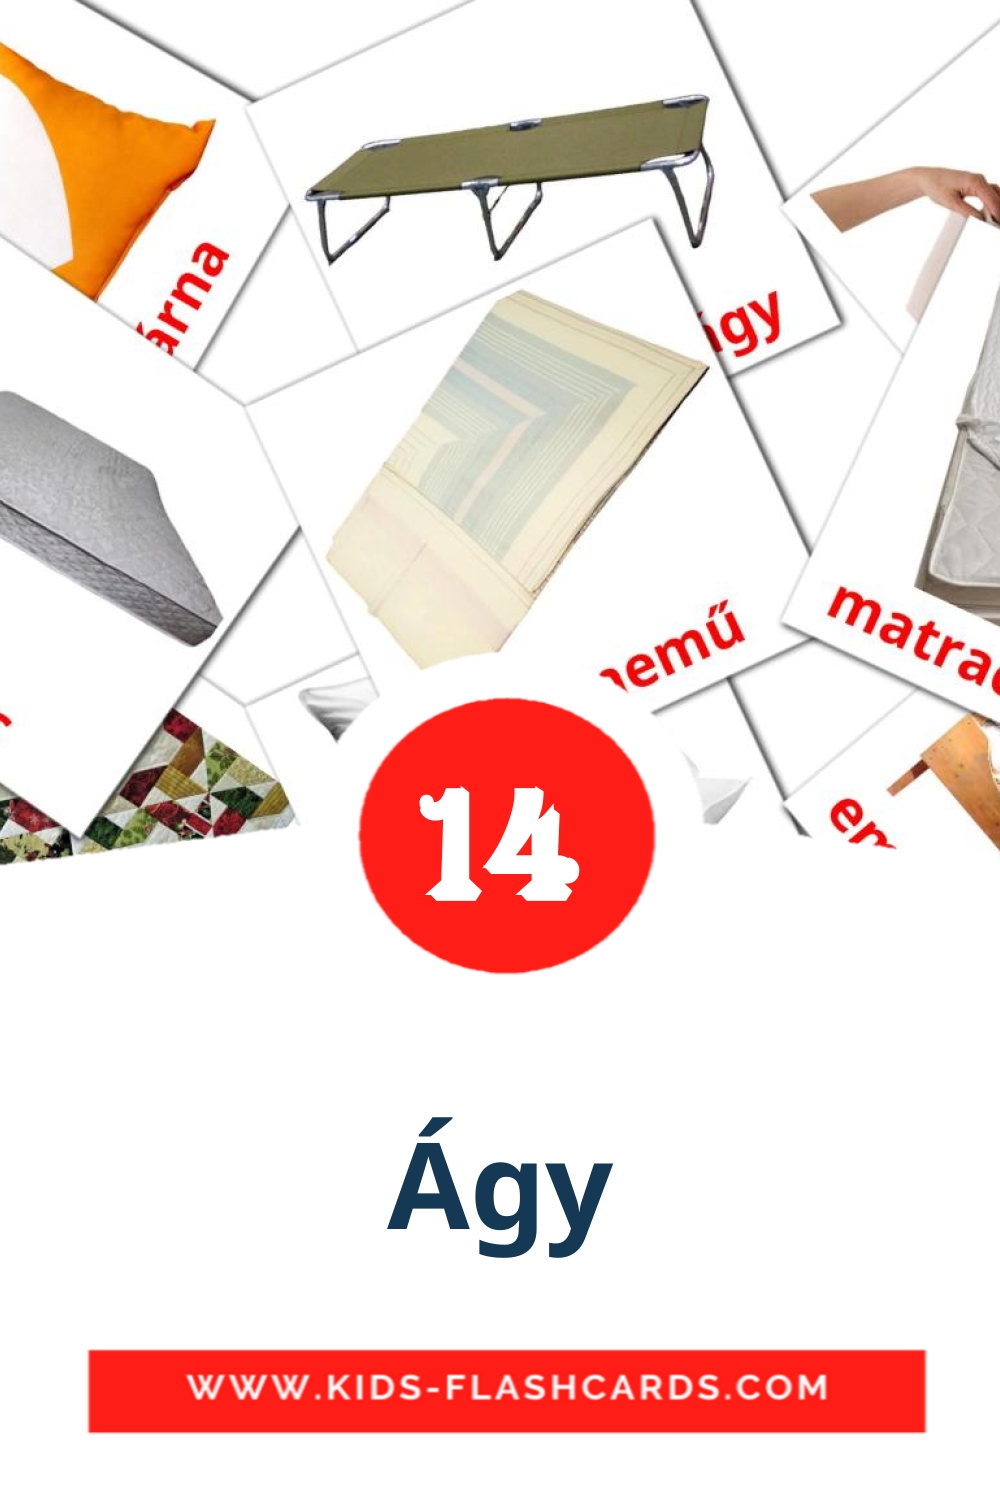 14 Ágy Picture Cards for Kindergarden in hungarian